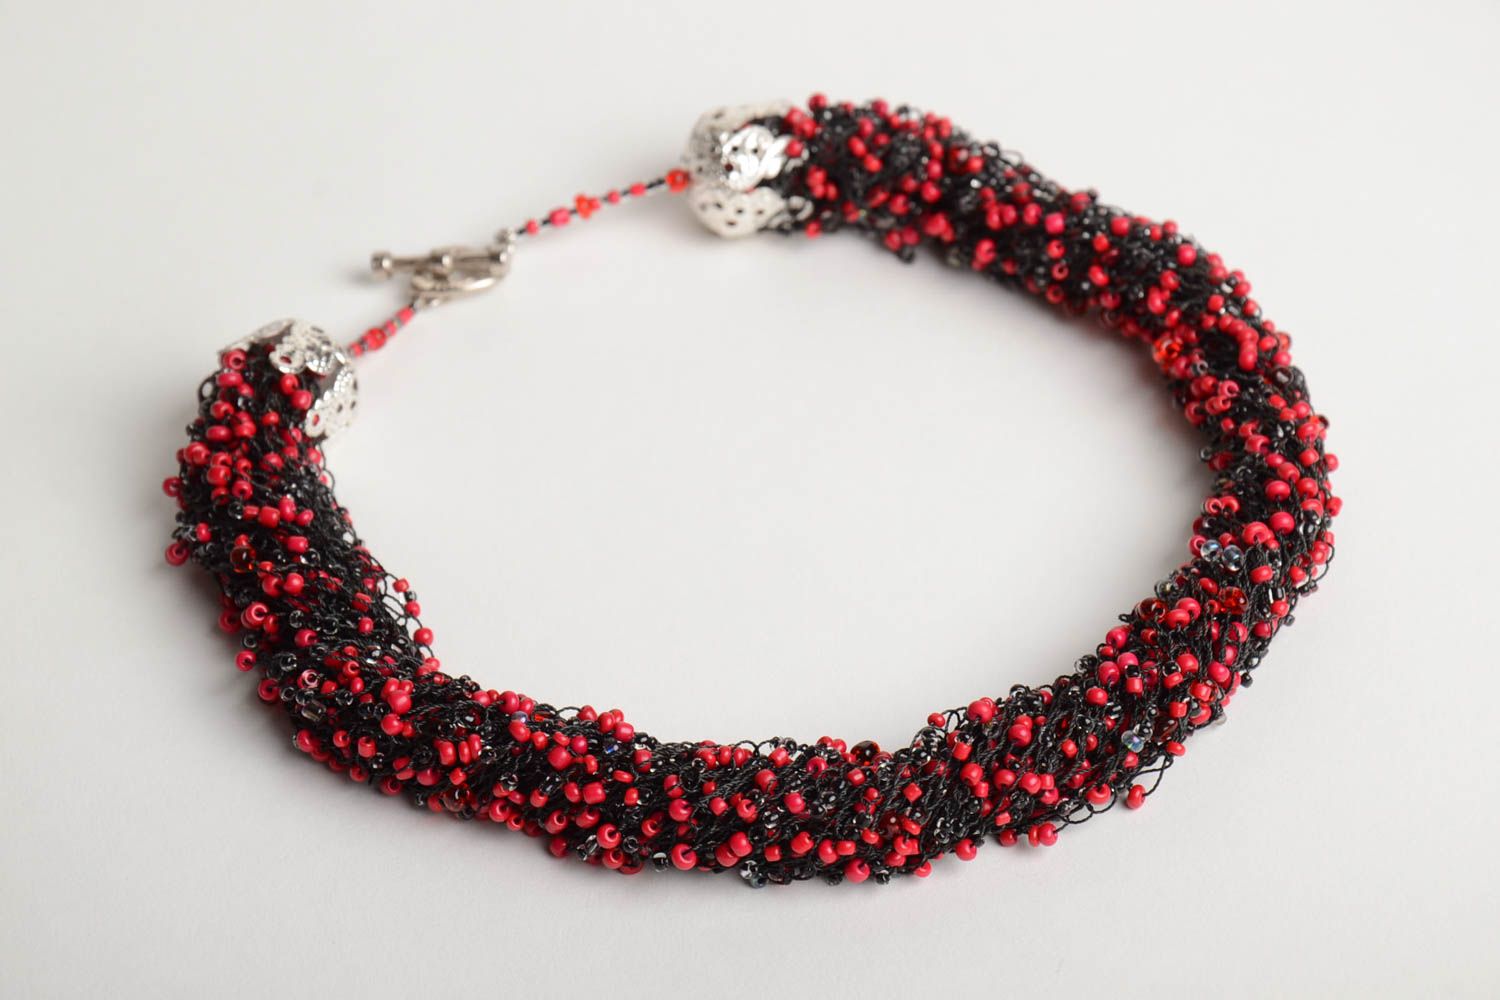 Handmade crocheted beaded necklace in passionate red and black color combination photo 3